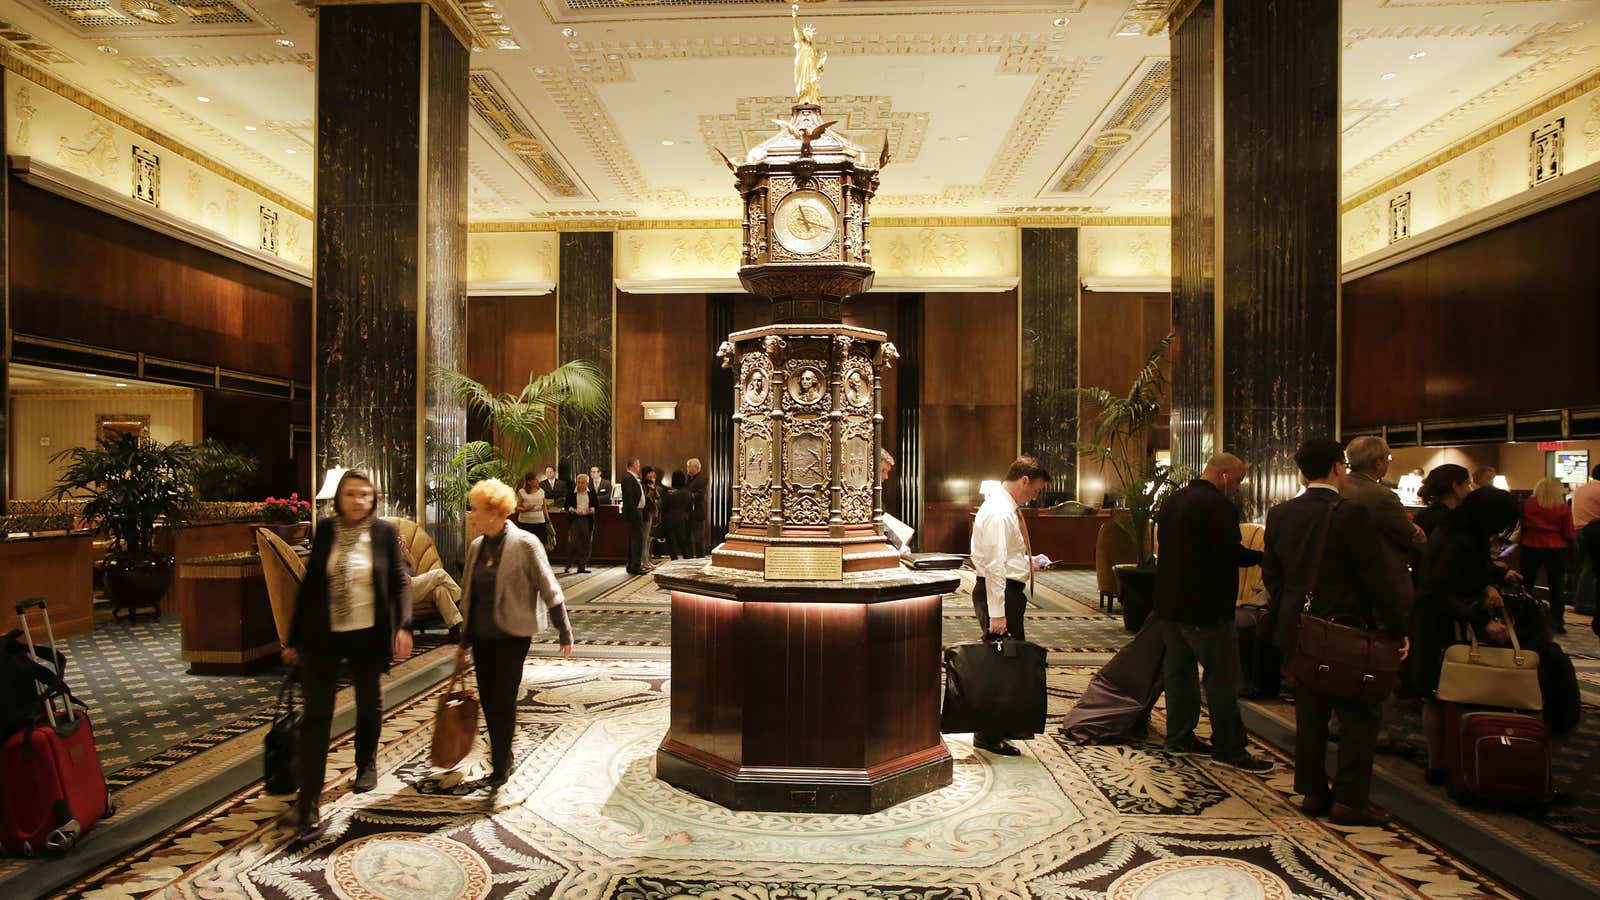 The famous clock, topped by a miniature Statue of Liberty, greets guests.